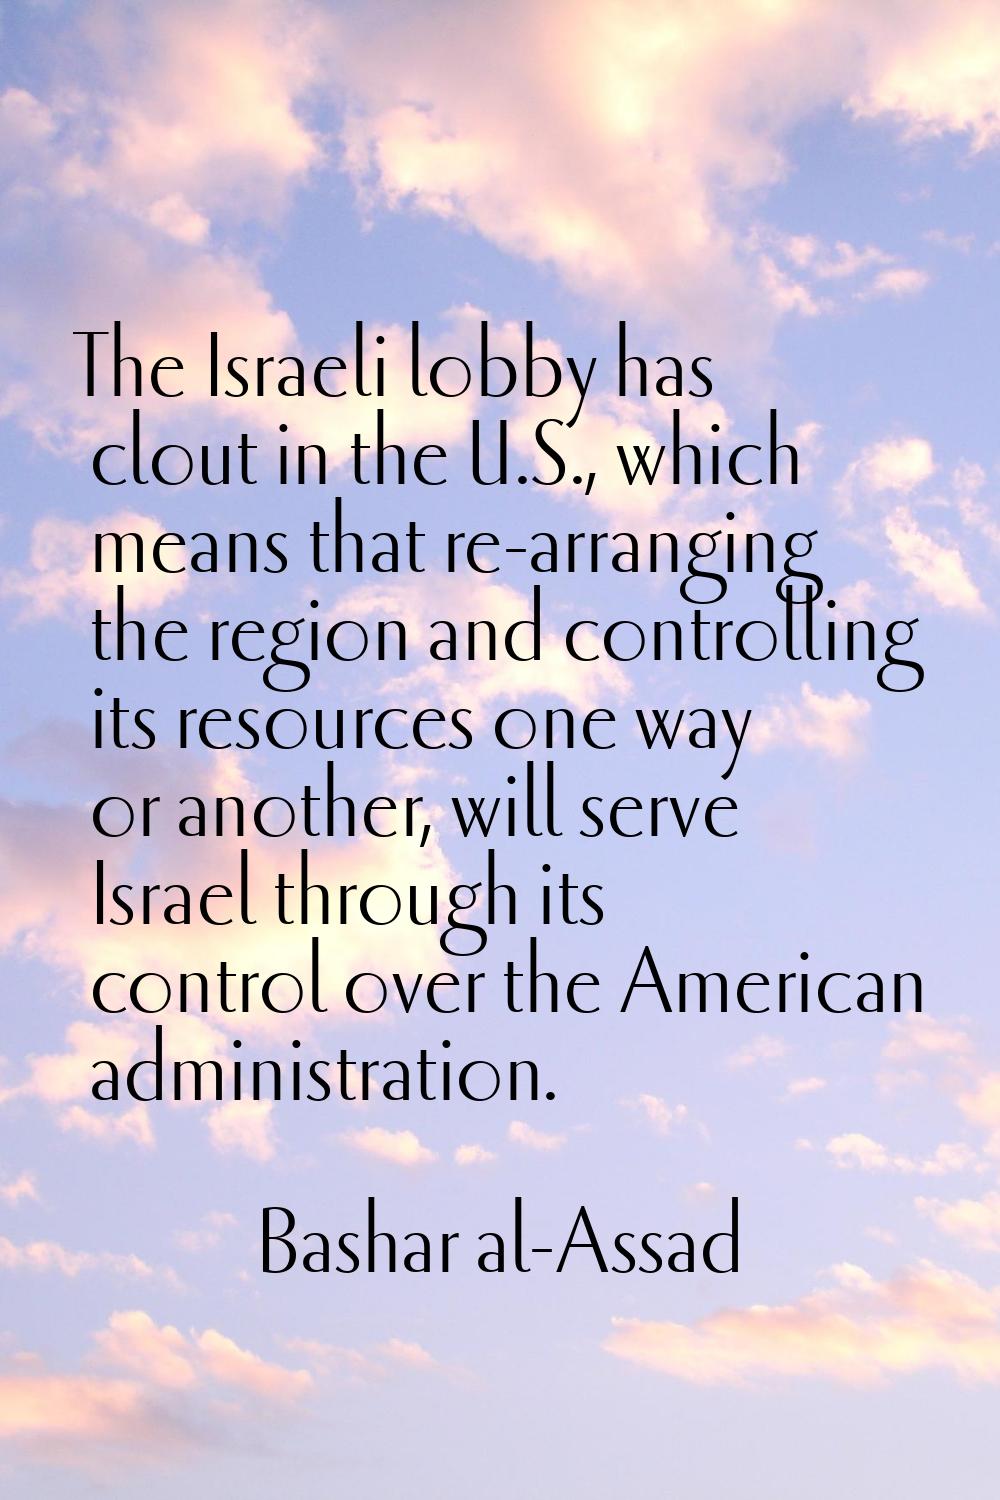 The Israeli lobby has clout in the U.S., which means that re-arranging the region and controlling i